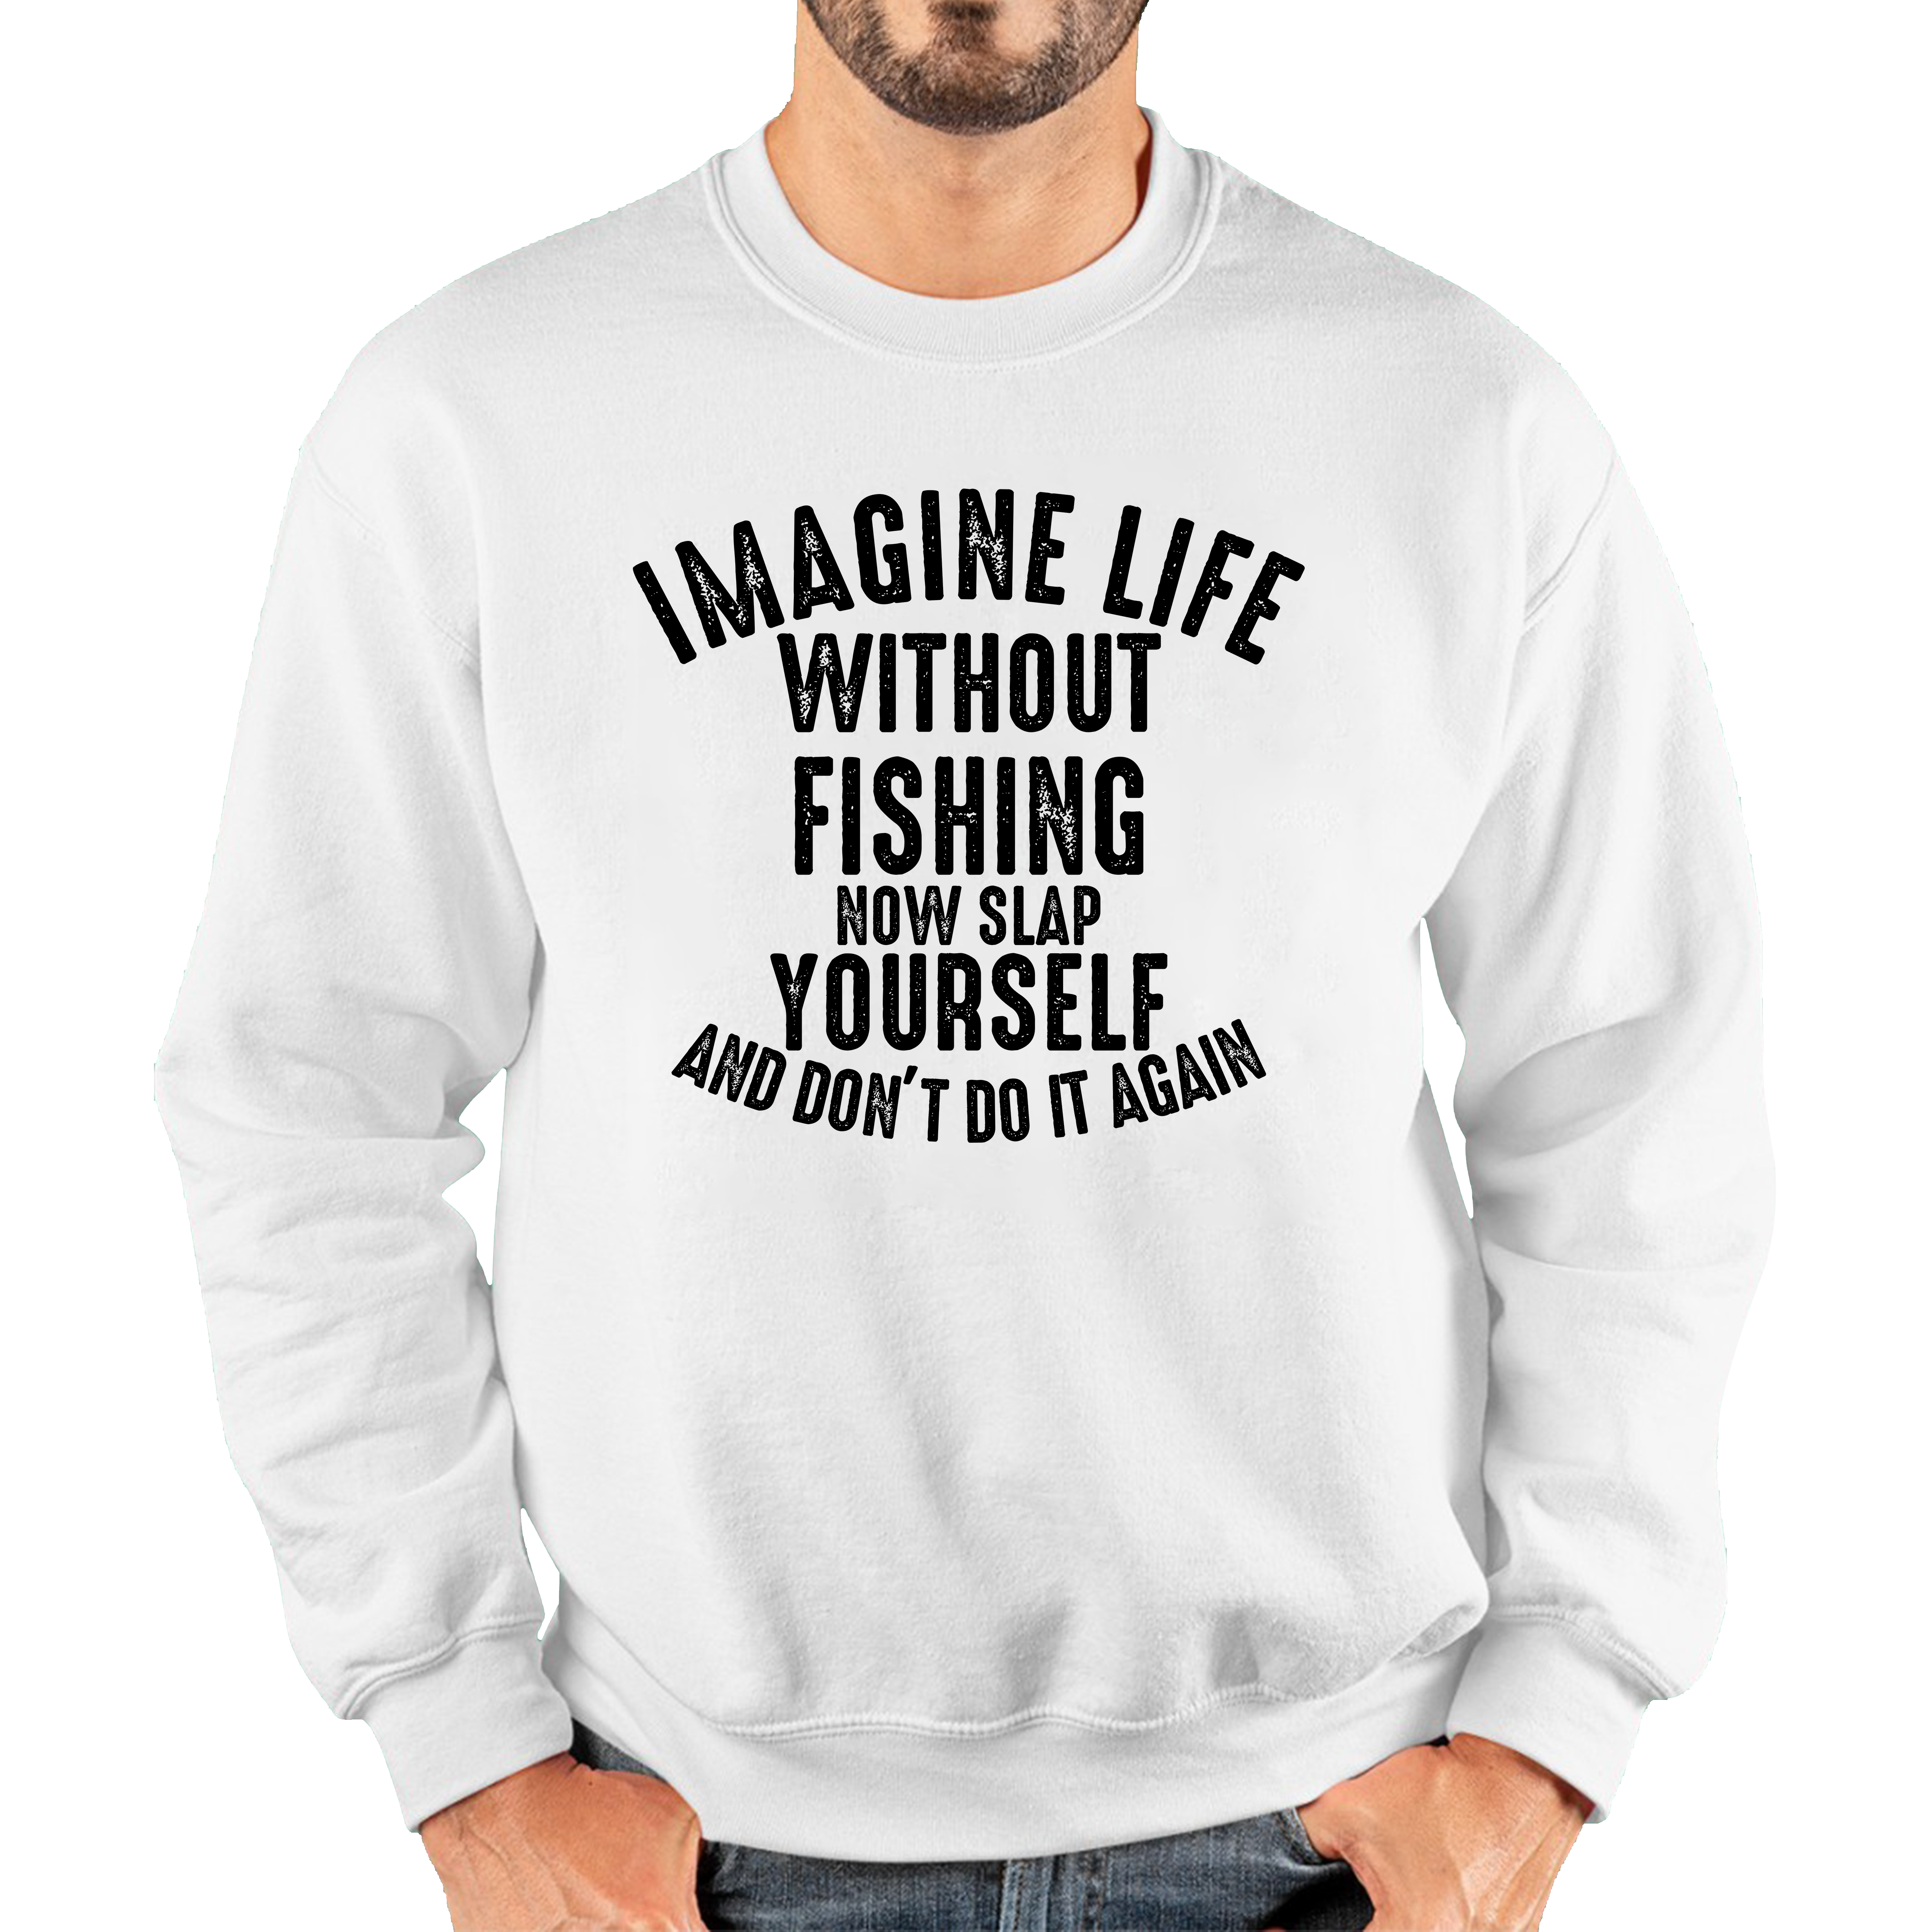 Imagine Life Without Fishing Now Slap Yourself And Don't Do It Again Jumper Fisherman Fishing Adventure Hobby Funny Unisex Sweatshirt